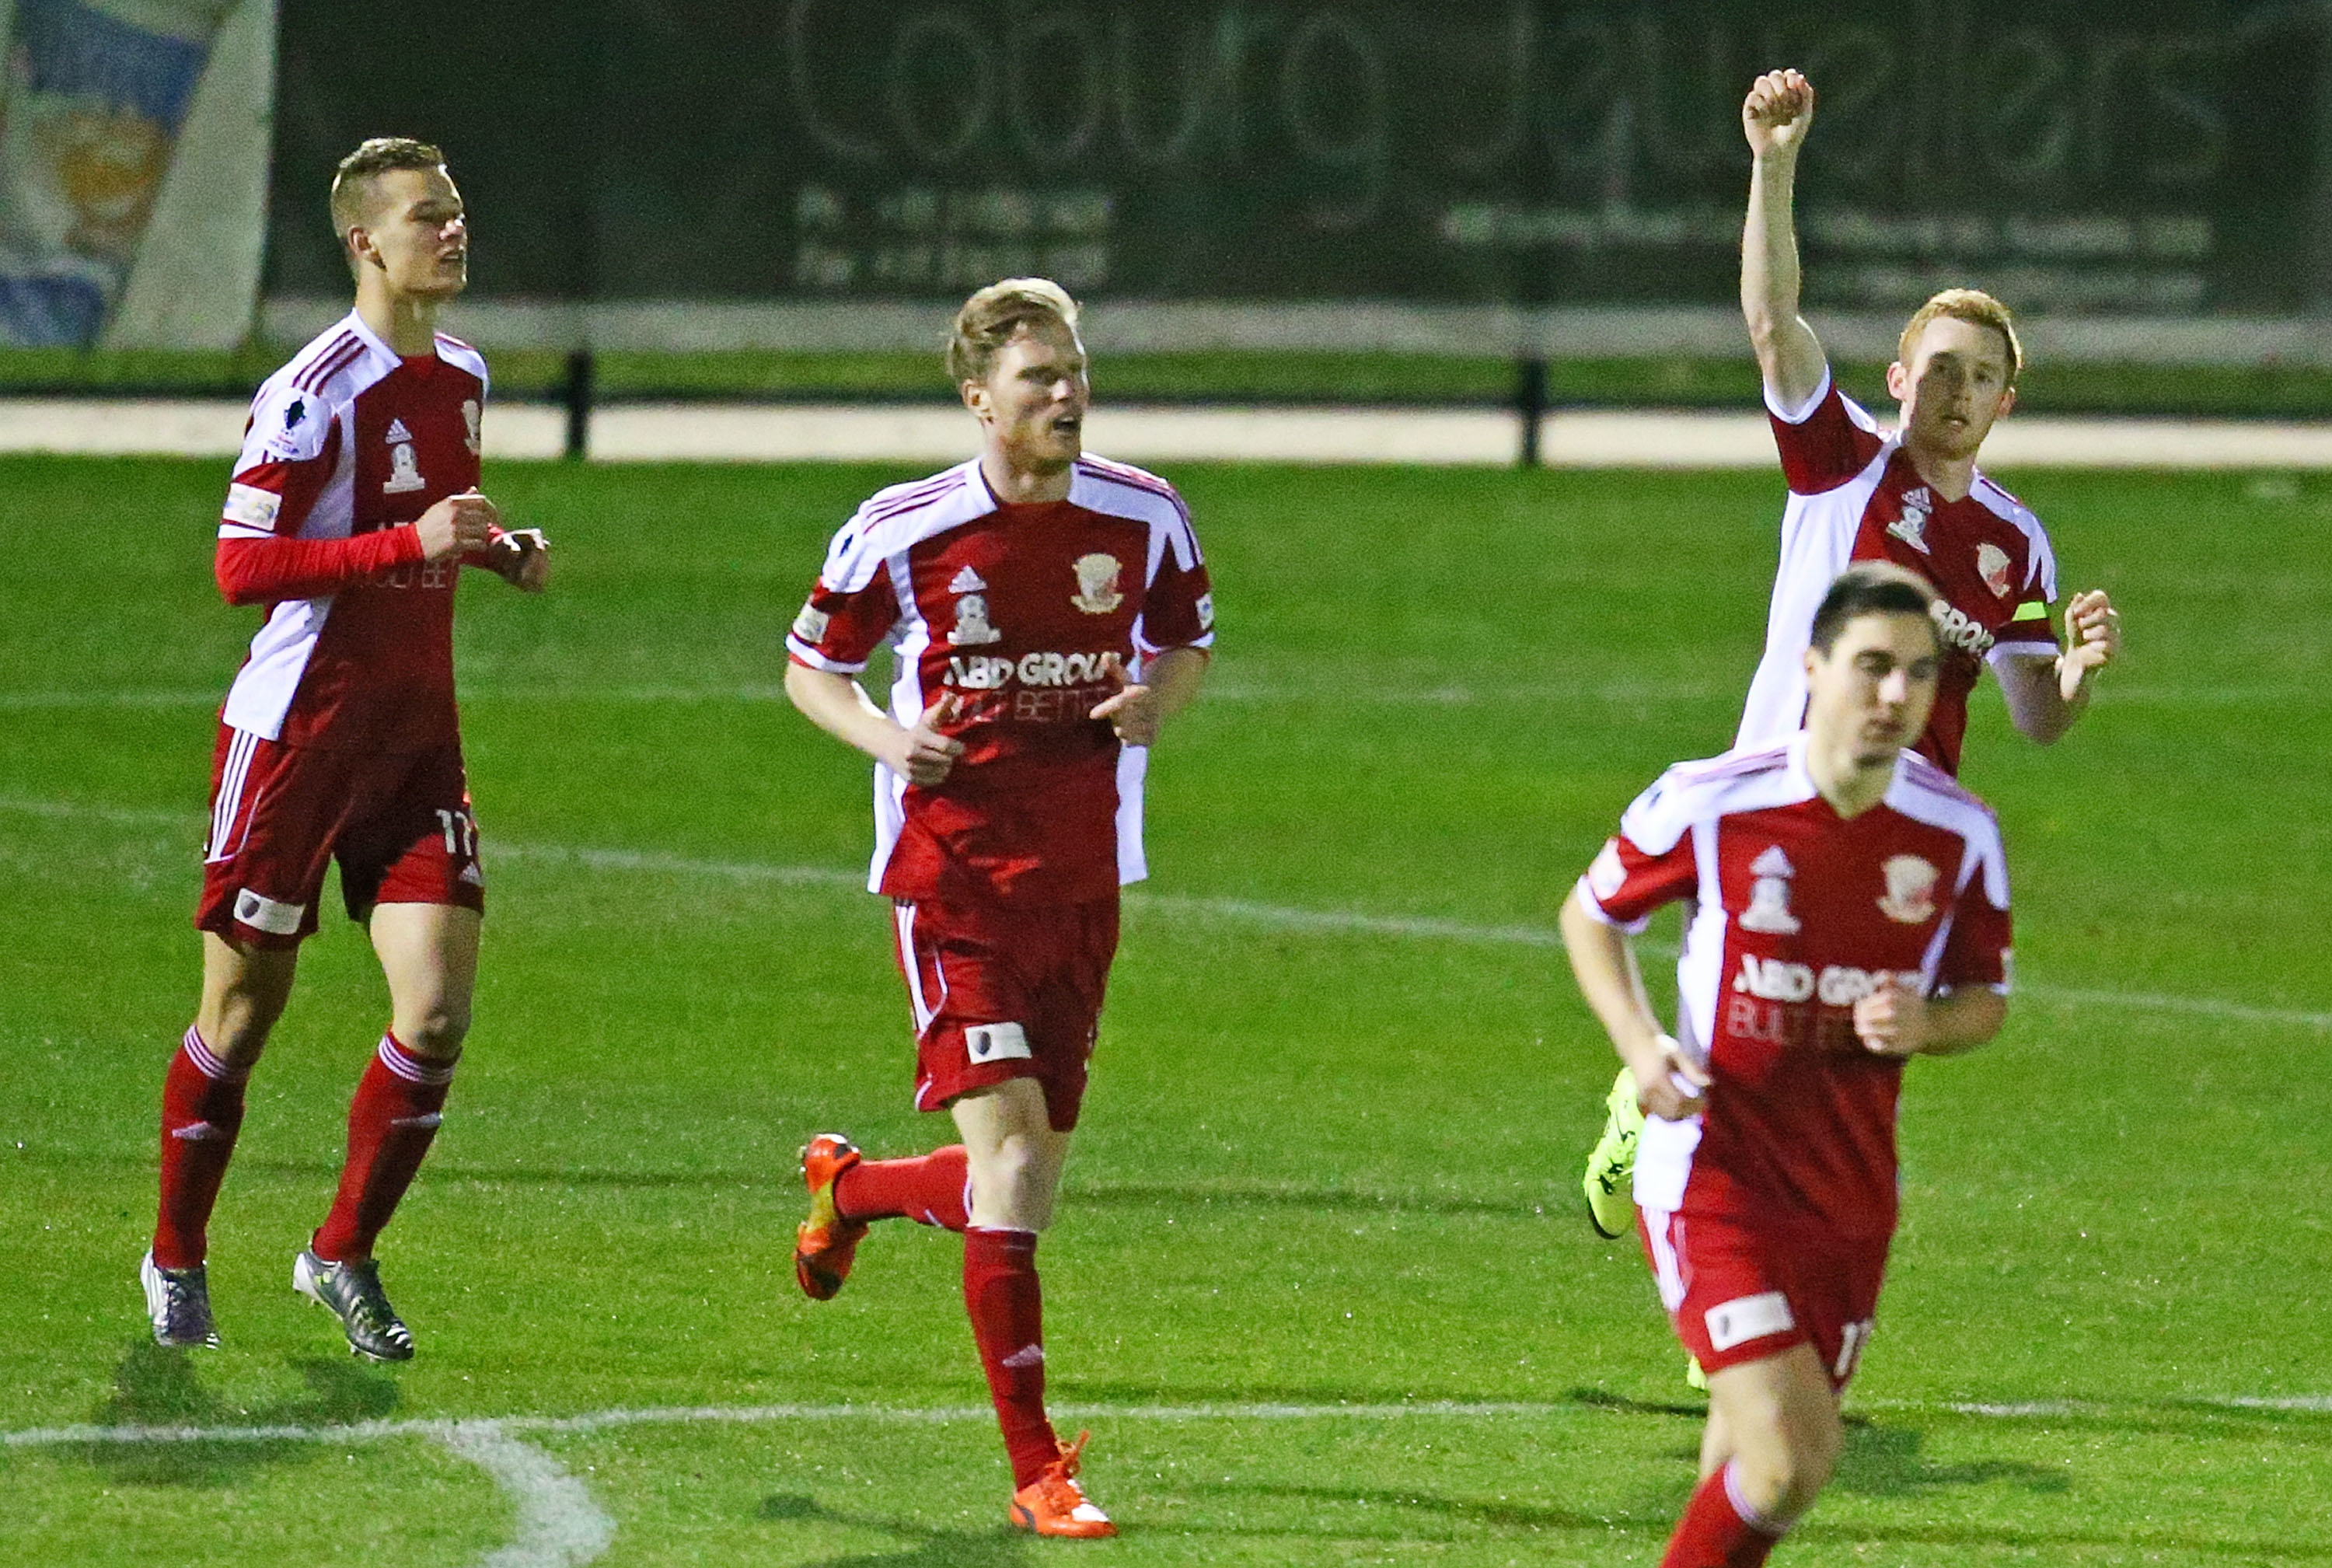 Nicholas Hegarty (R) of Hume City FC celebrates after scoring against Brisbane Strikers.